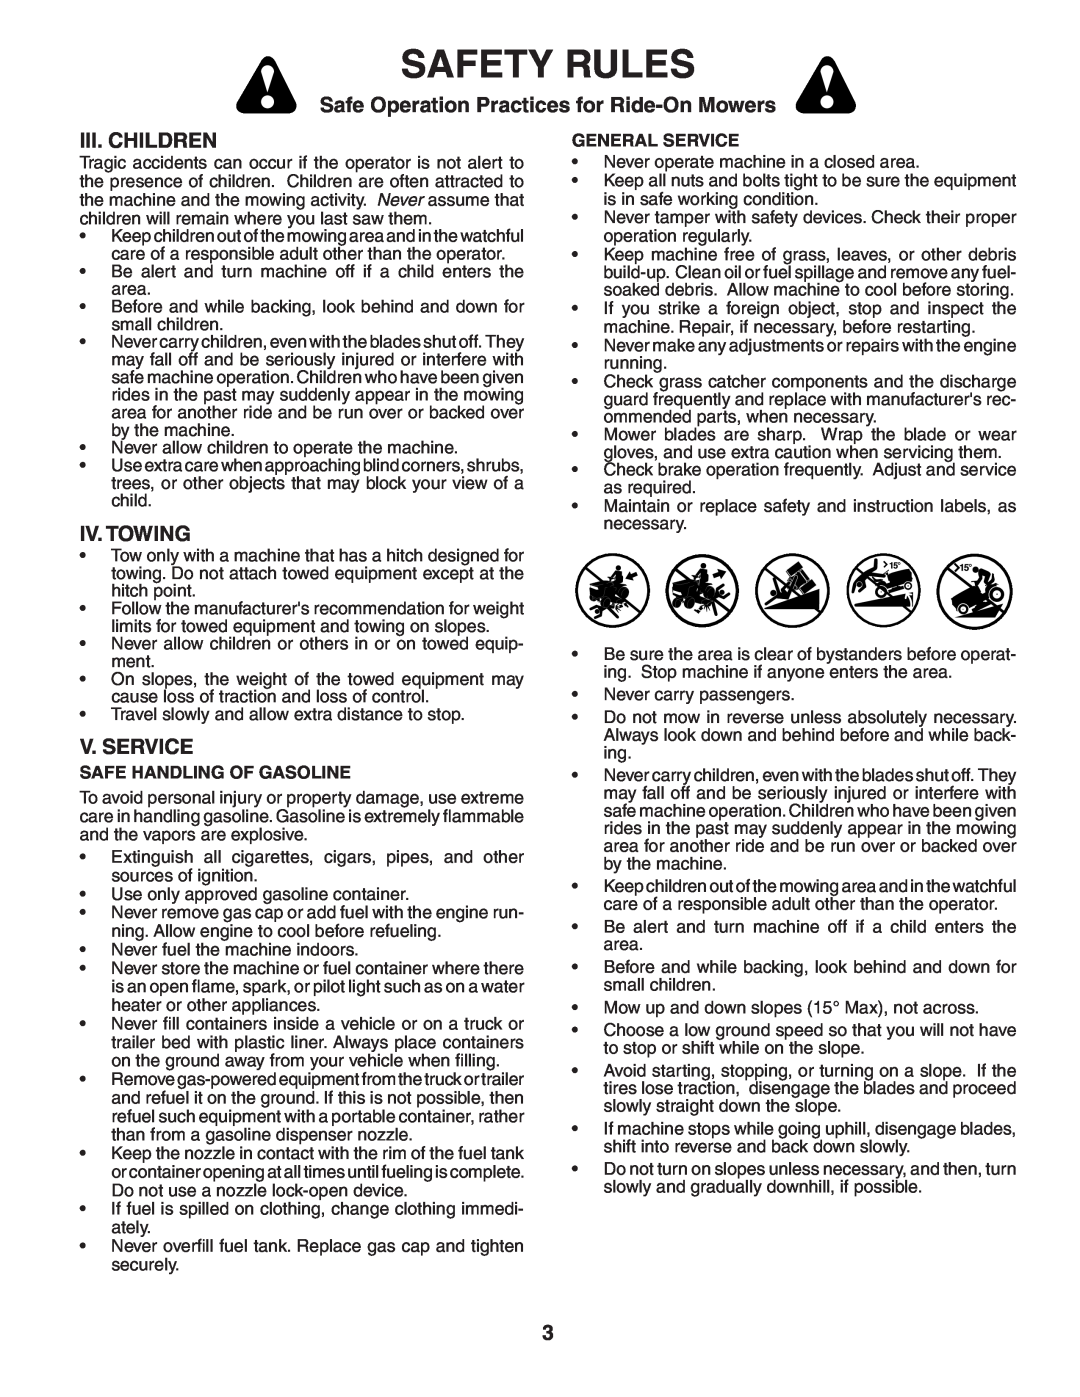 Poulan HD17542 manual Iii. Children, Iv. Towing, V. Service, Safety Rules, Safe Operation Practices for Ride-On Mowers 